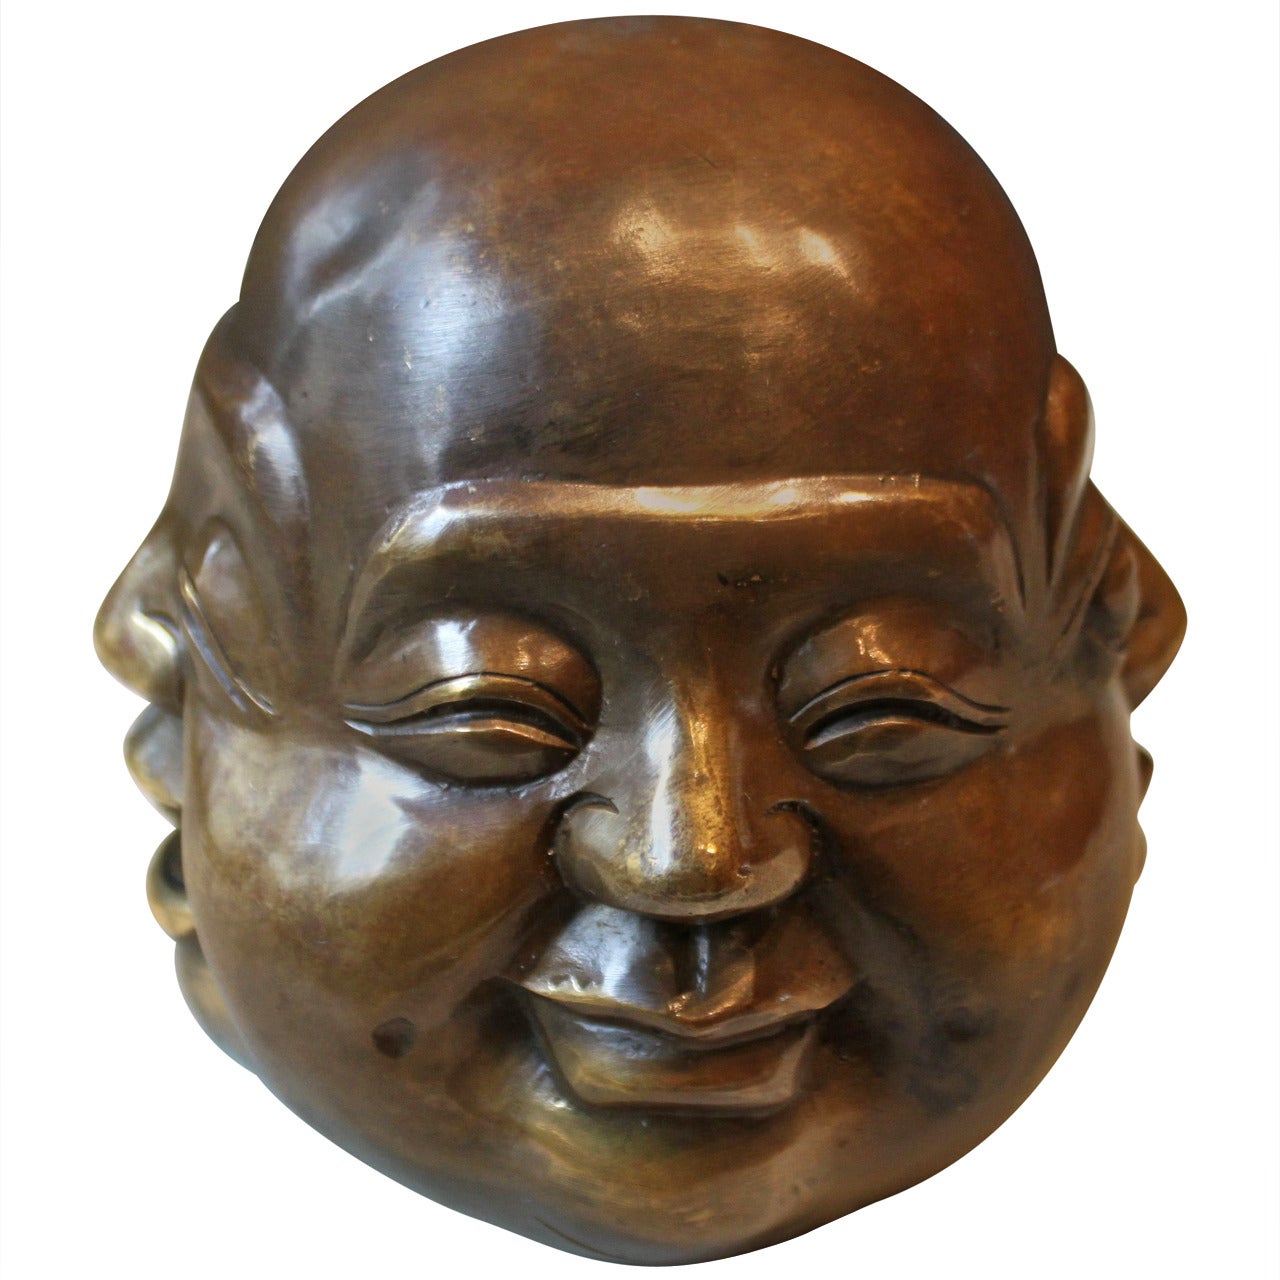 Japanese Brass Sculpture of Buddha Head With Four Faces, 19th Century